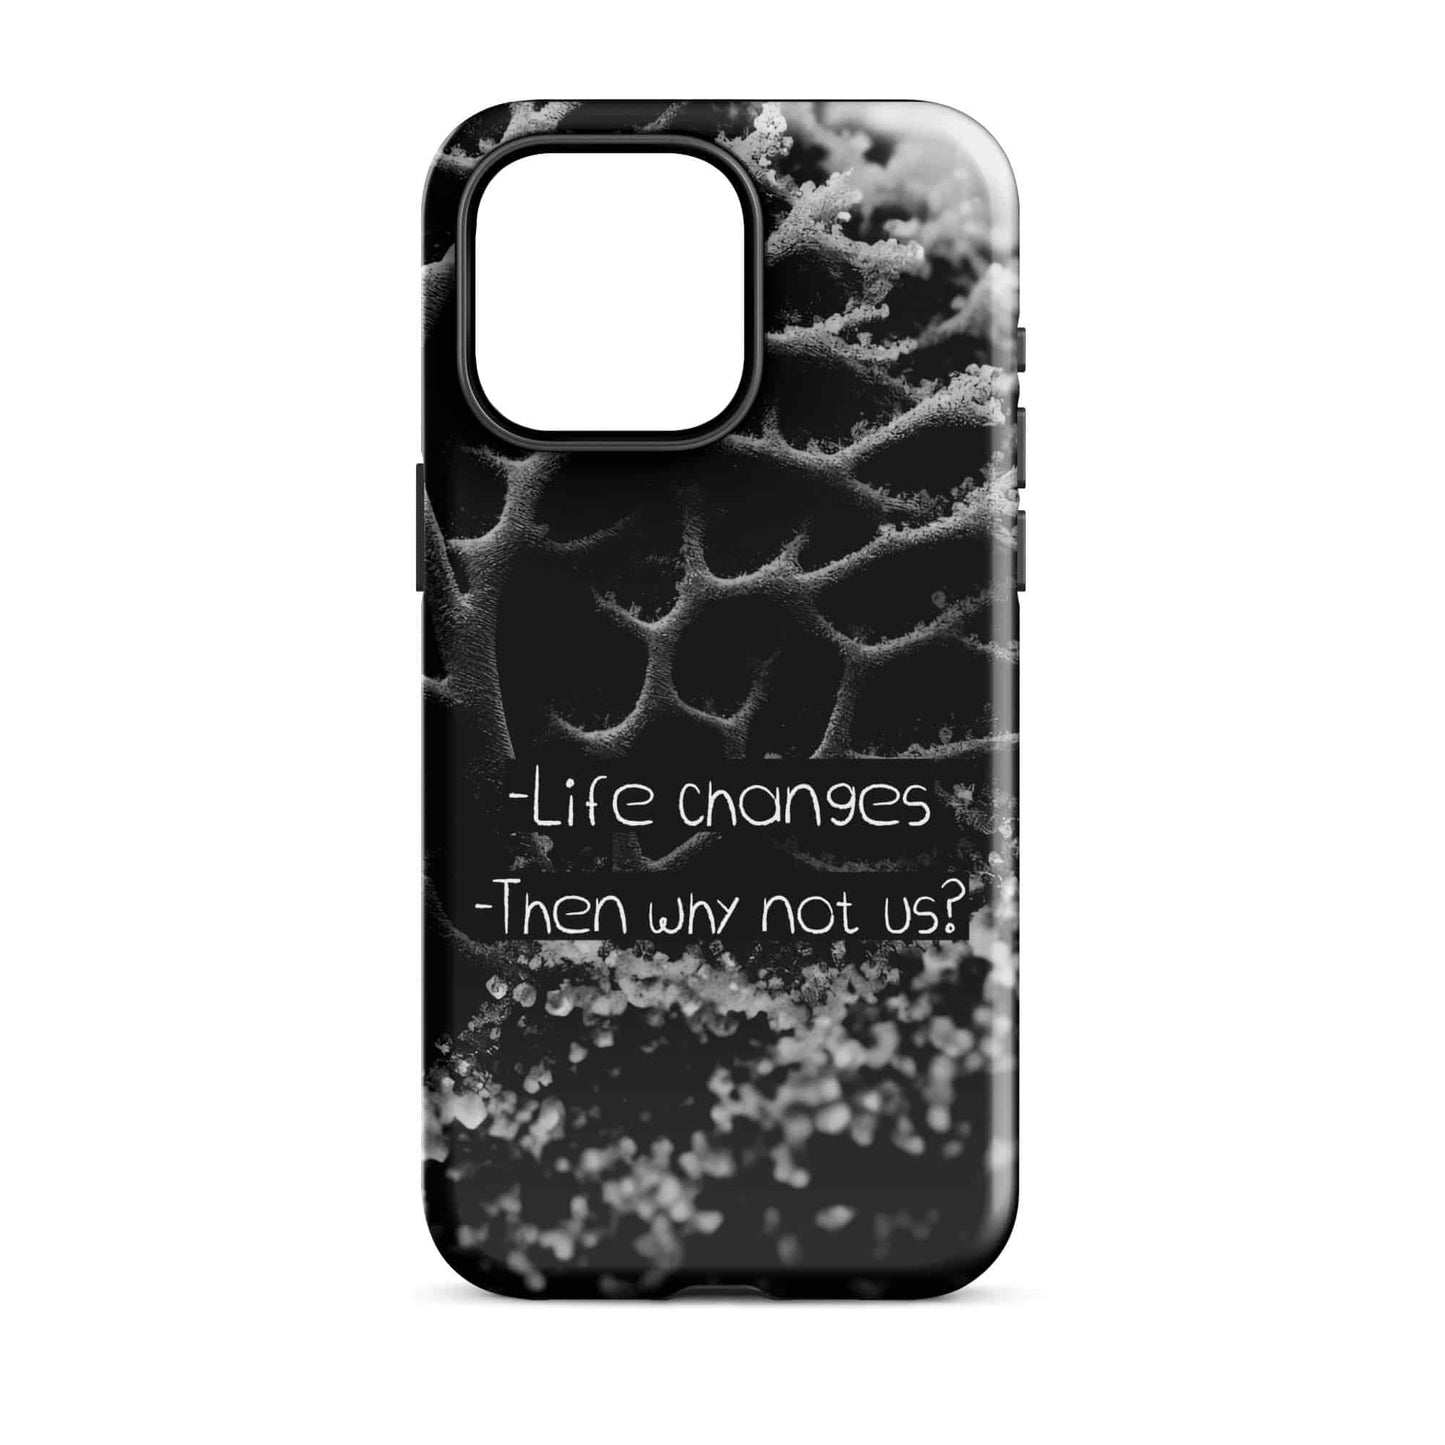 Life Changes - (Black Sand) Quoted iPhone Case